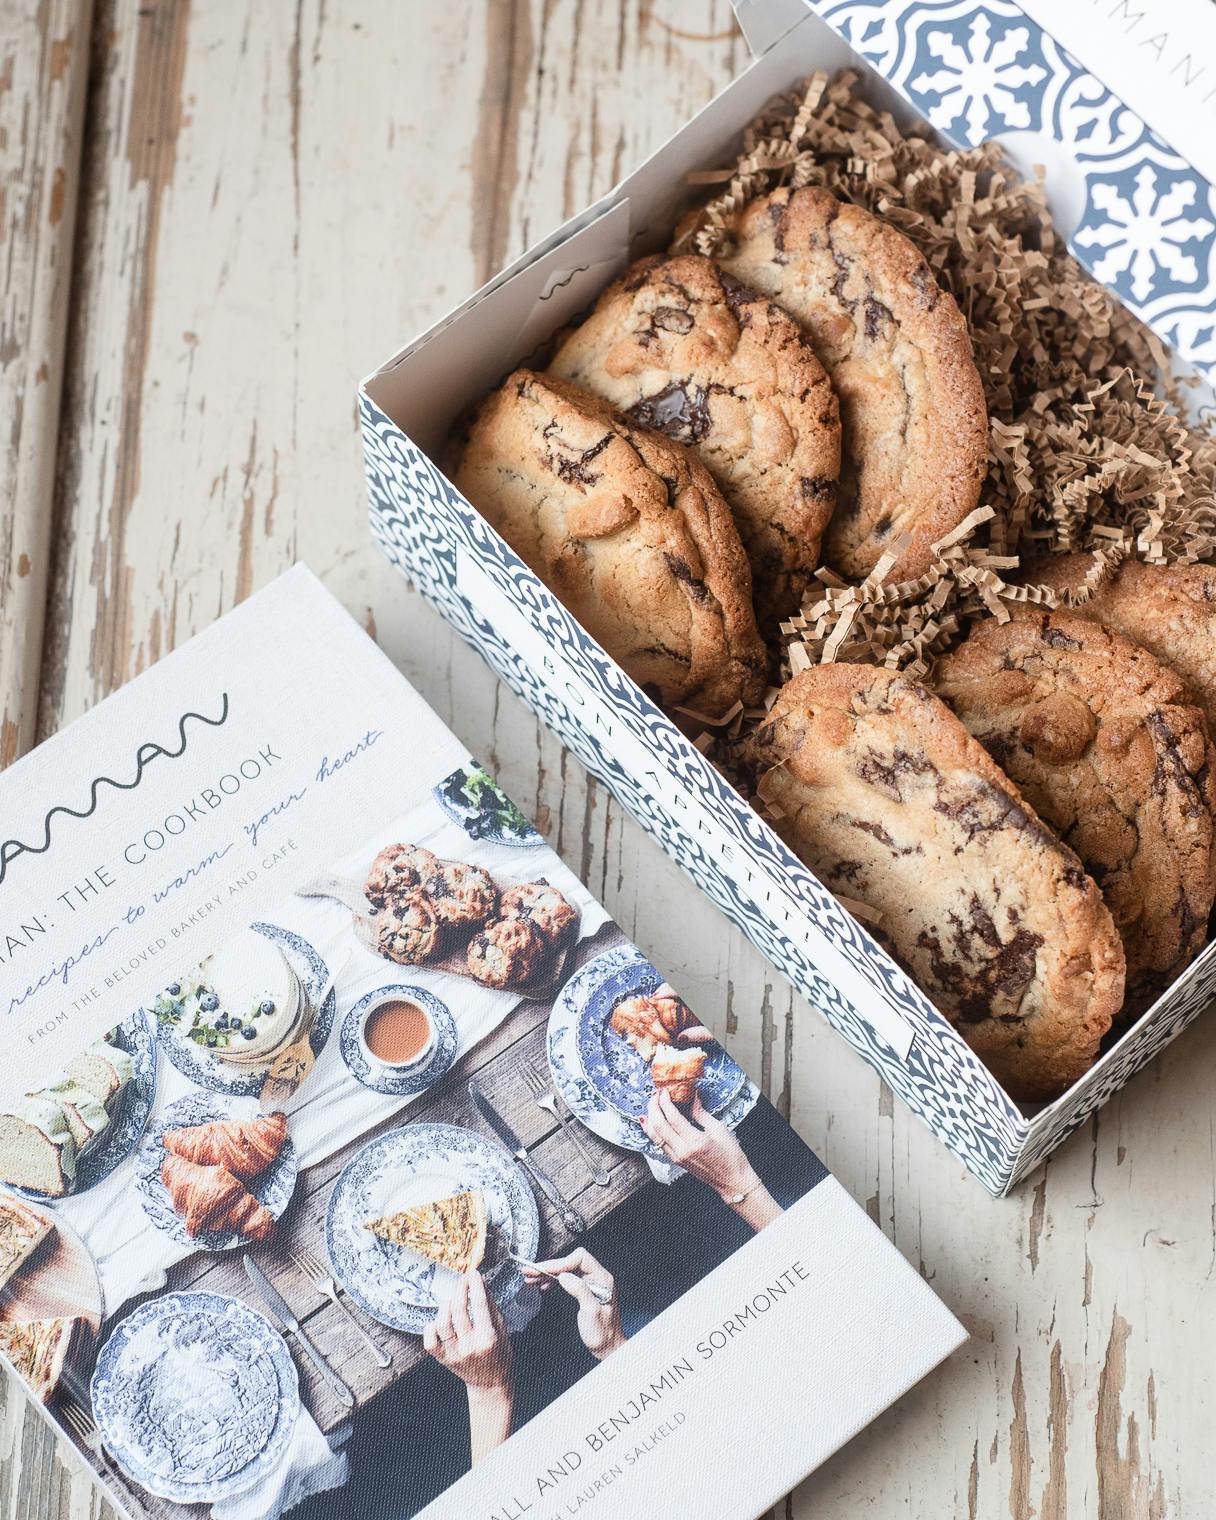 NYC's Maman bakery, with one of Oprah's favorite cookies, plans 3 DC-area  locations - WTOP News